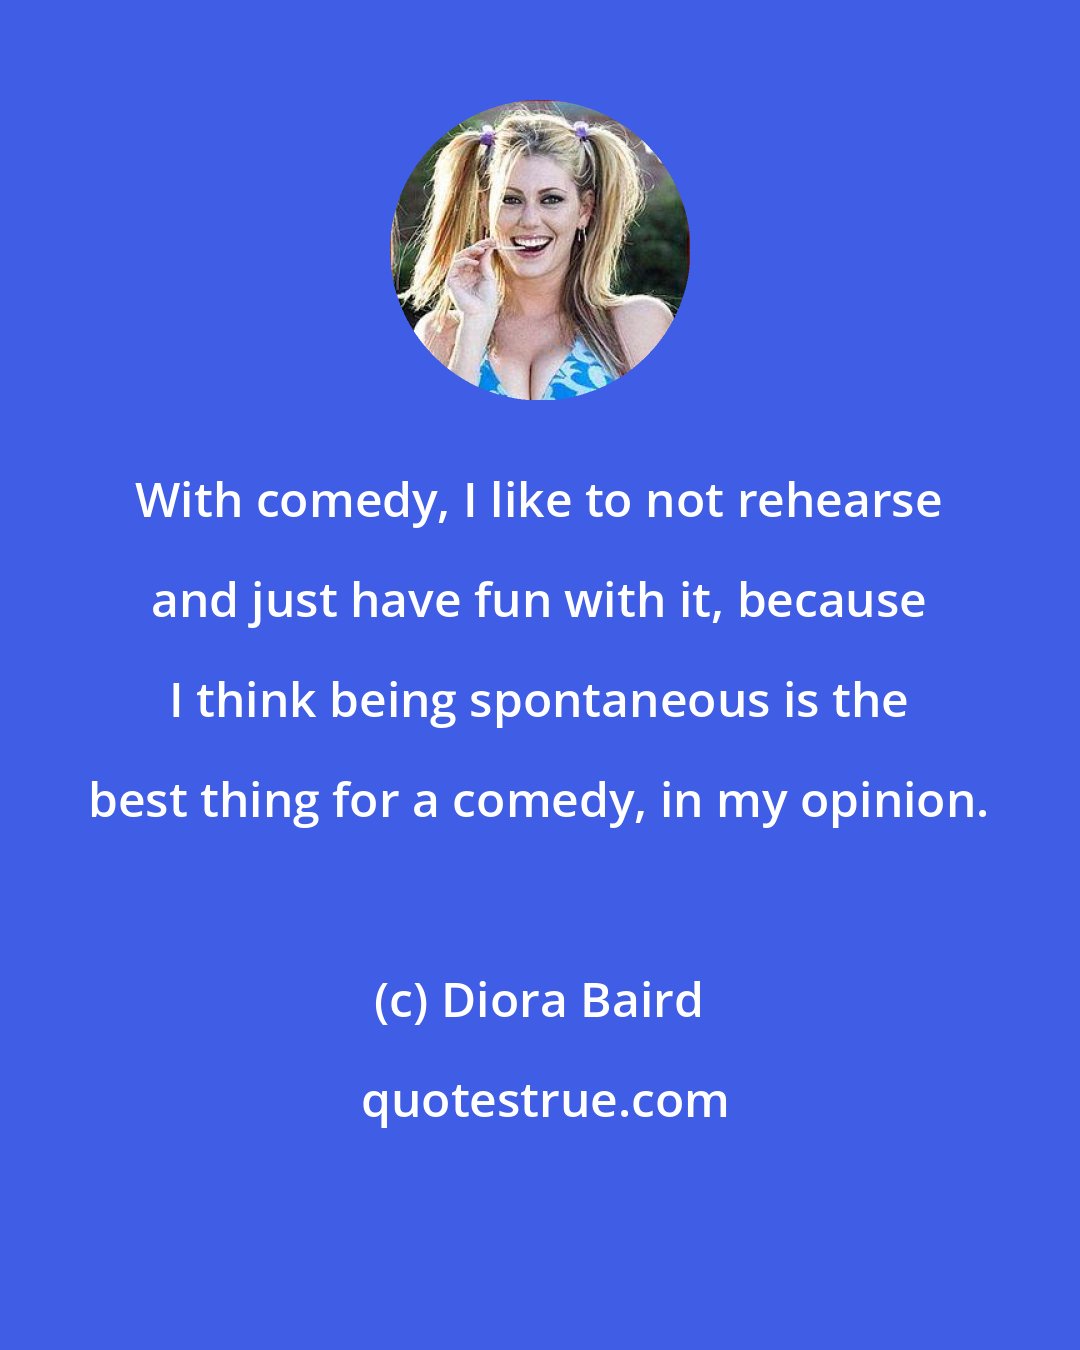 Diora Baird: With comedy, I like to not rehearse and just have fun with it, because I think being spontaneous is the best thing for a comedy, in my opinion.